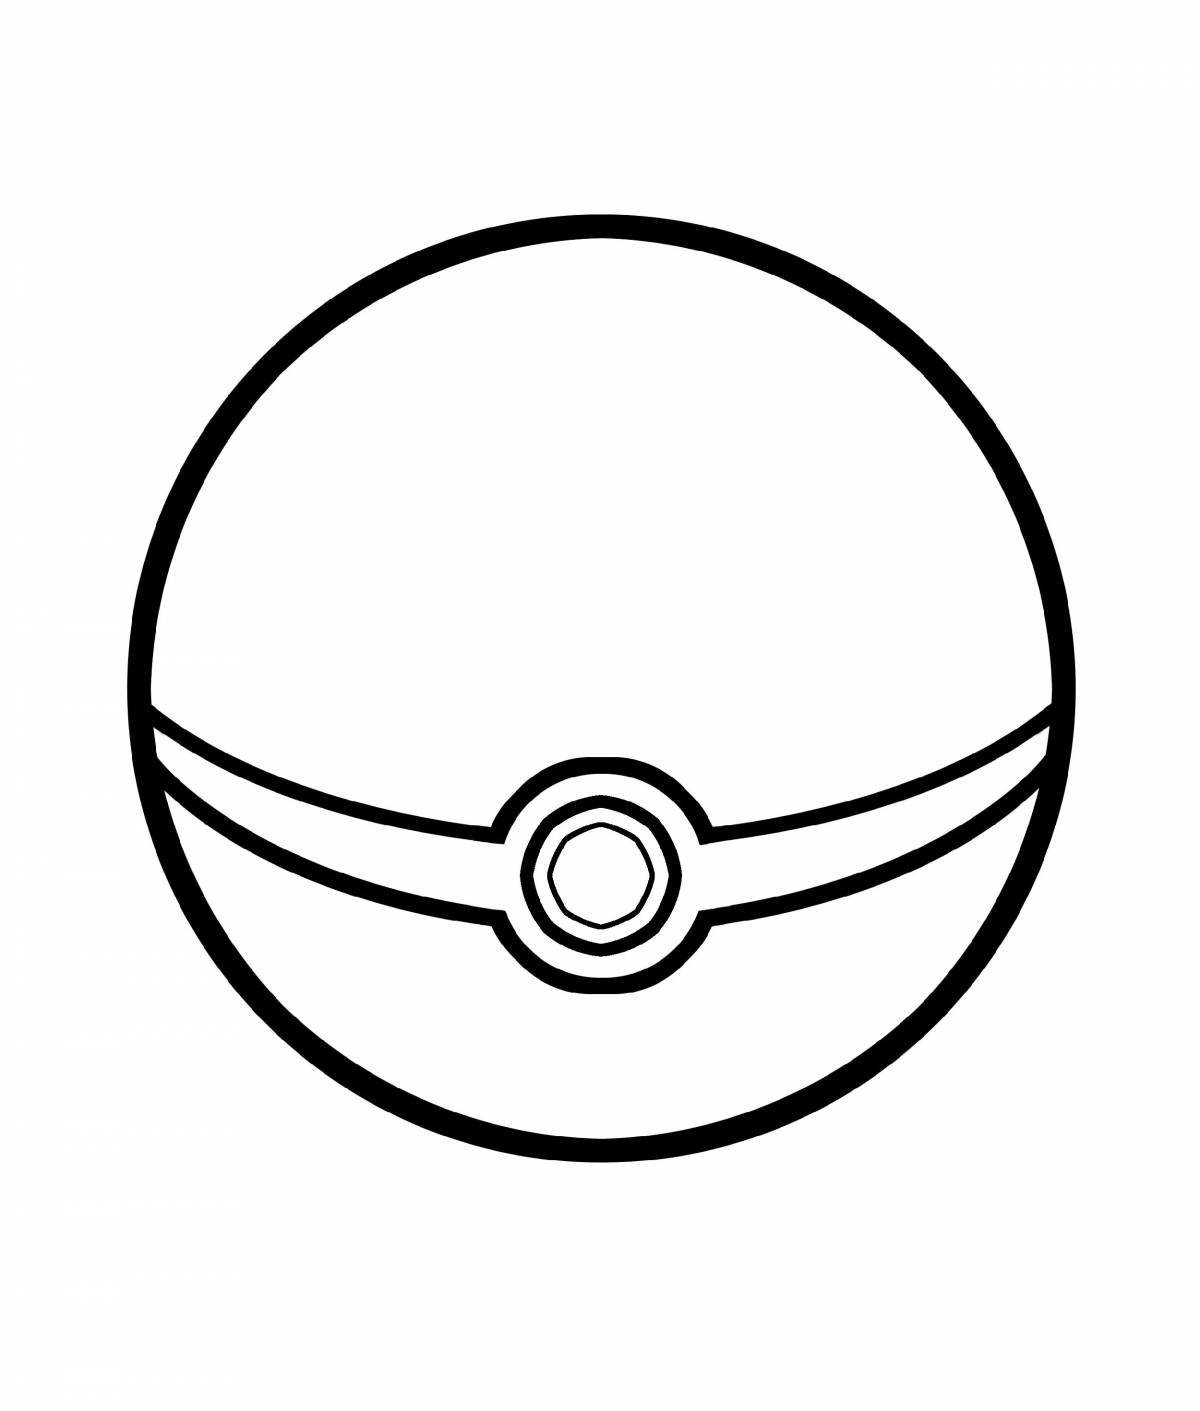 Great pokeball coloring page